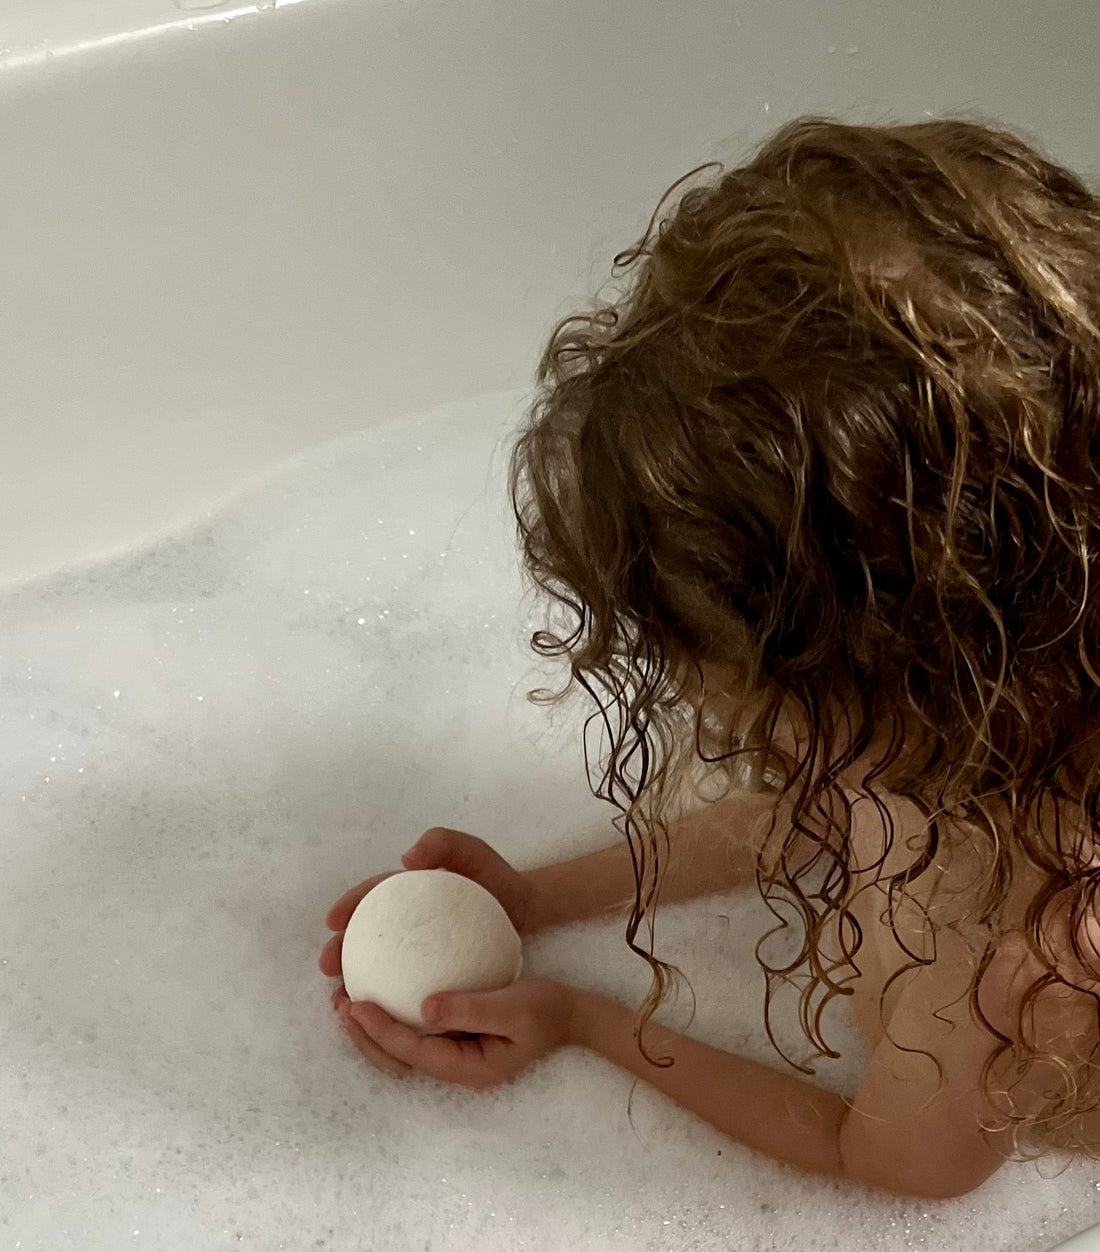 pick the best natural bath bombs for kids with sensitive skin